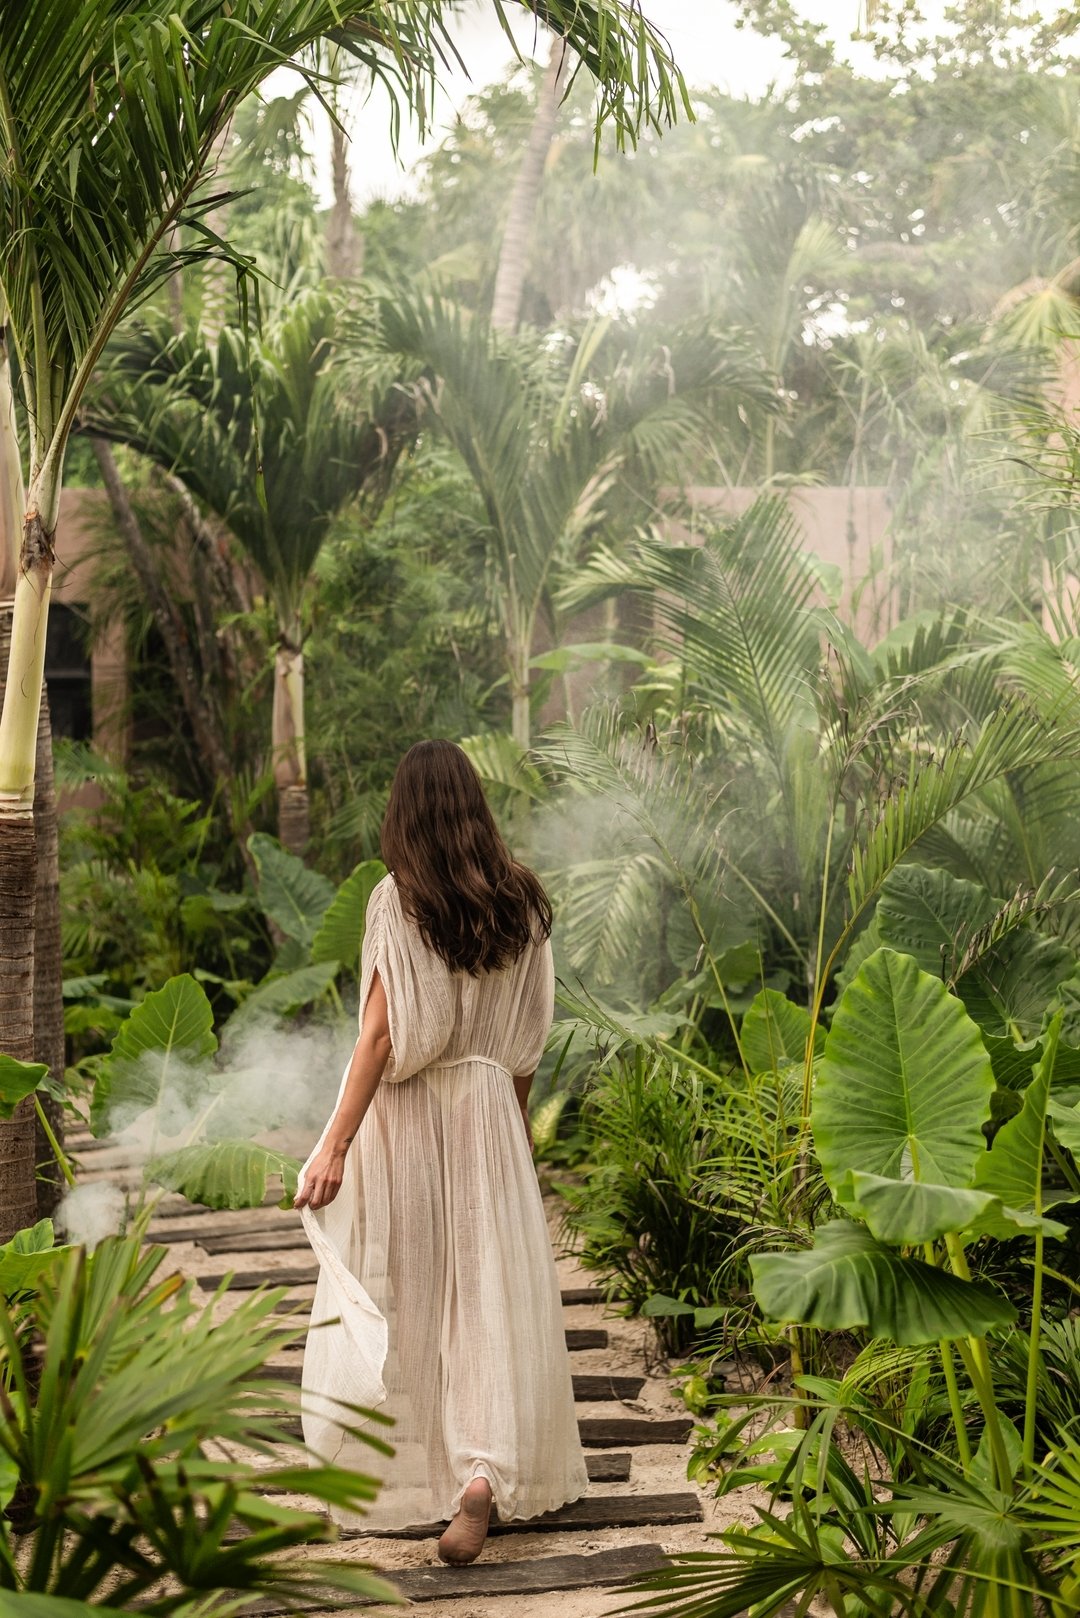 Tucked away between the azure Caribbean beach and the vibrant emerald jungle, our tranquil oasis beckons you to immerse yourself in the harmonious dance of nature.⁣

Escondido entre la azulada playa del Caribe y la vibrante selva esmeralda, nuestro o